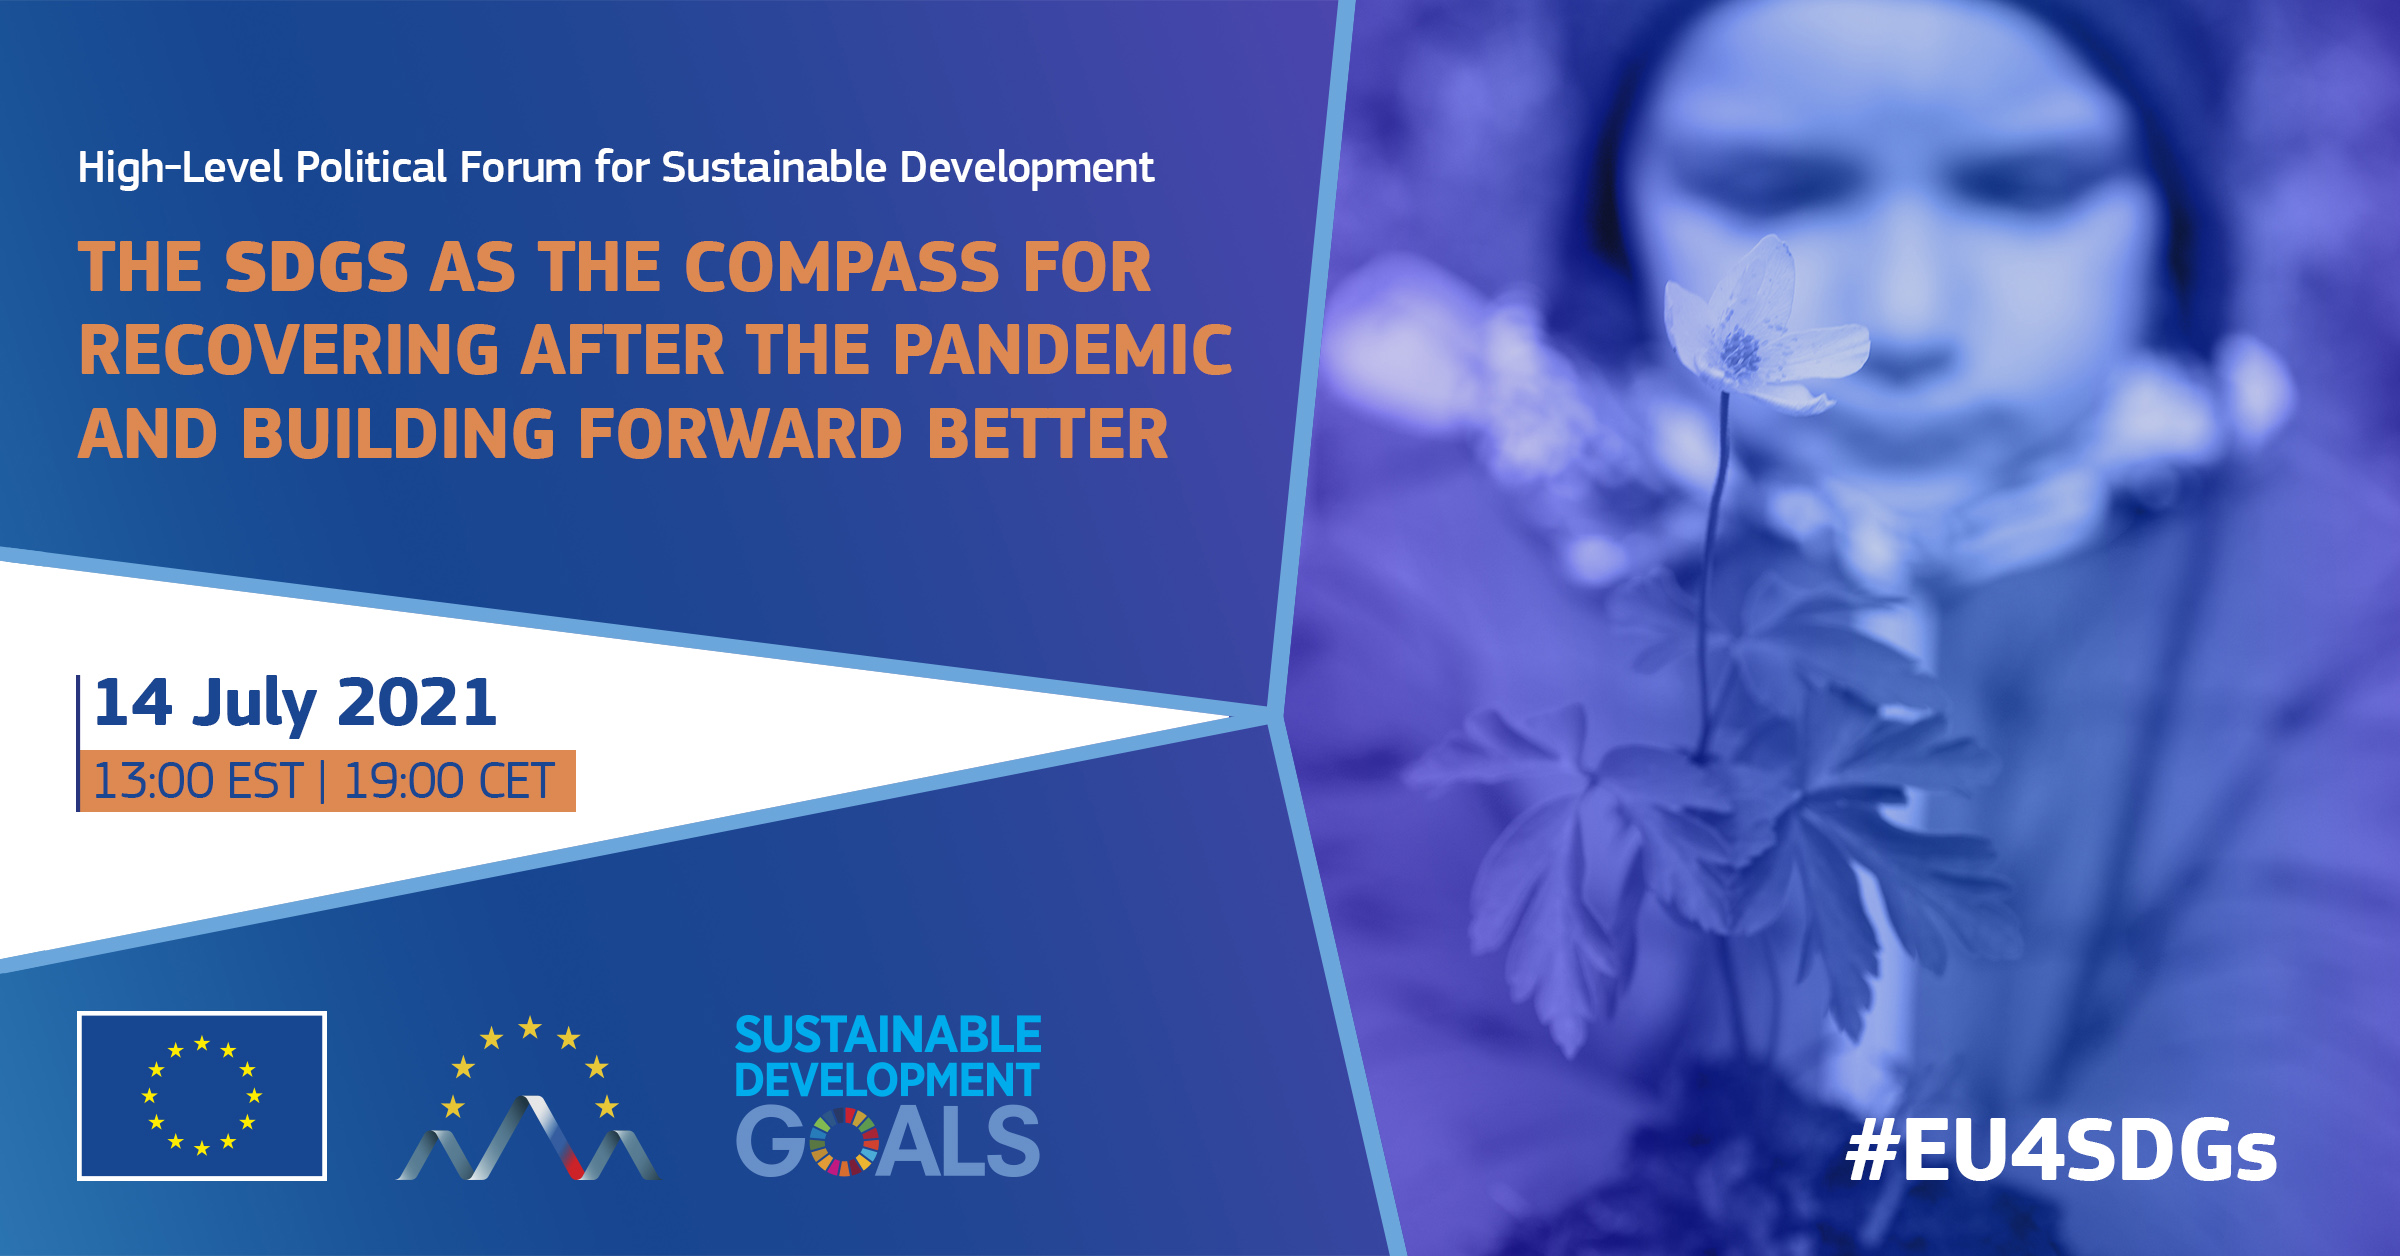 Using United Nations Sustainable Development Goals as a compass for Europe’s recovery